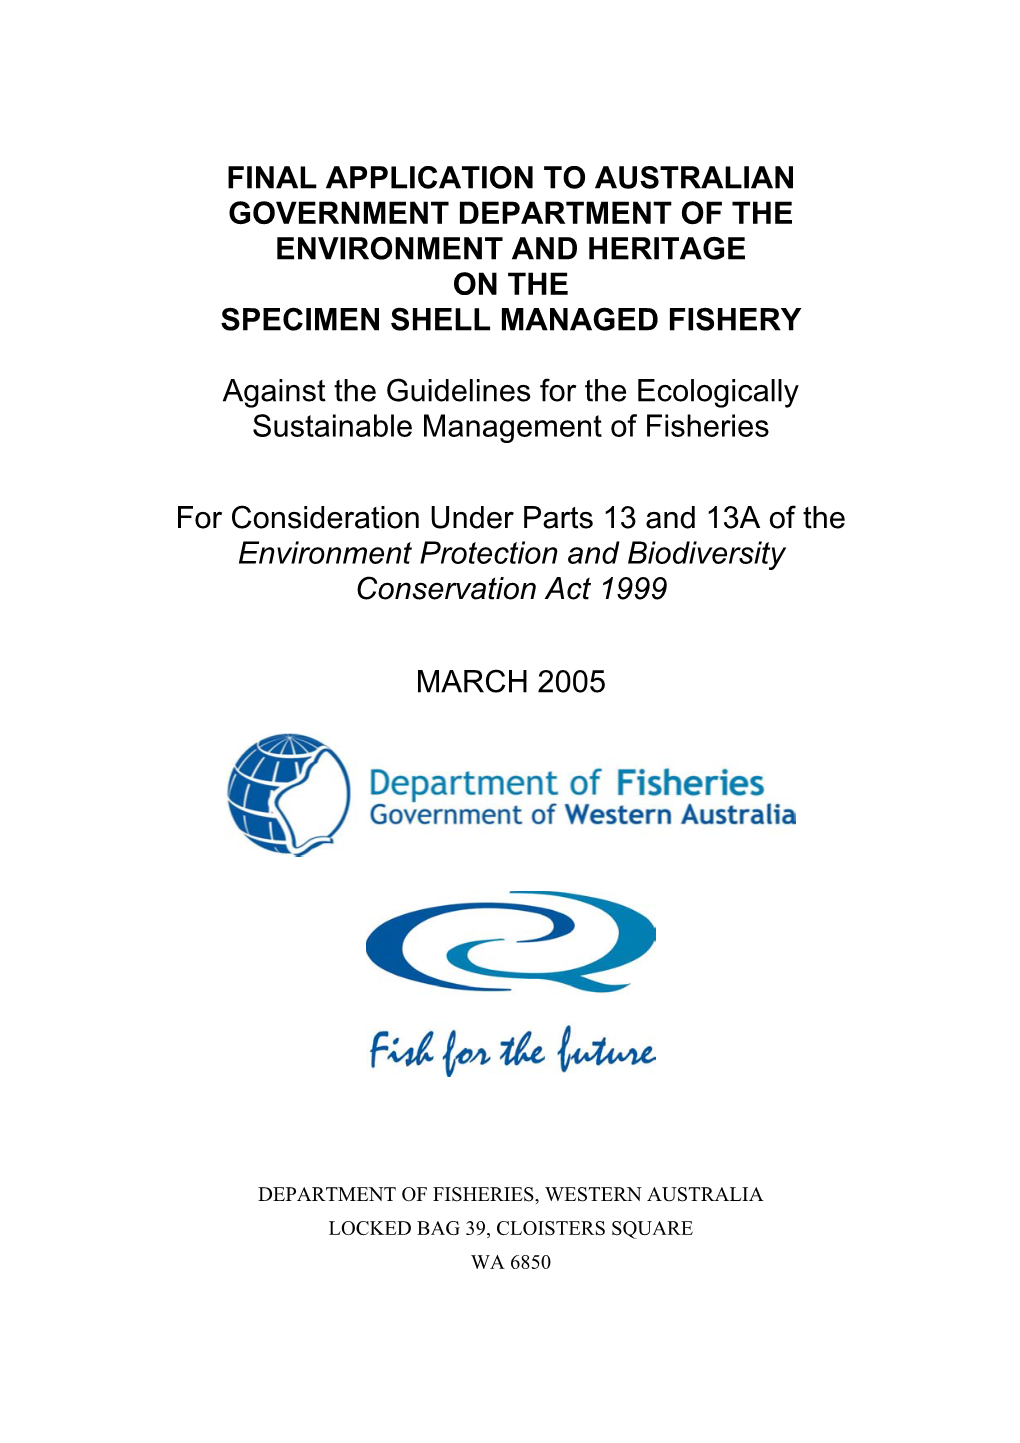 Final Application to Australian Government Department of the Environment and Heritage on the Specimen Shell Managed Fishery